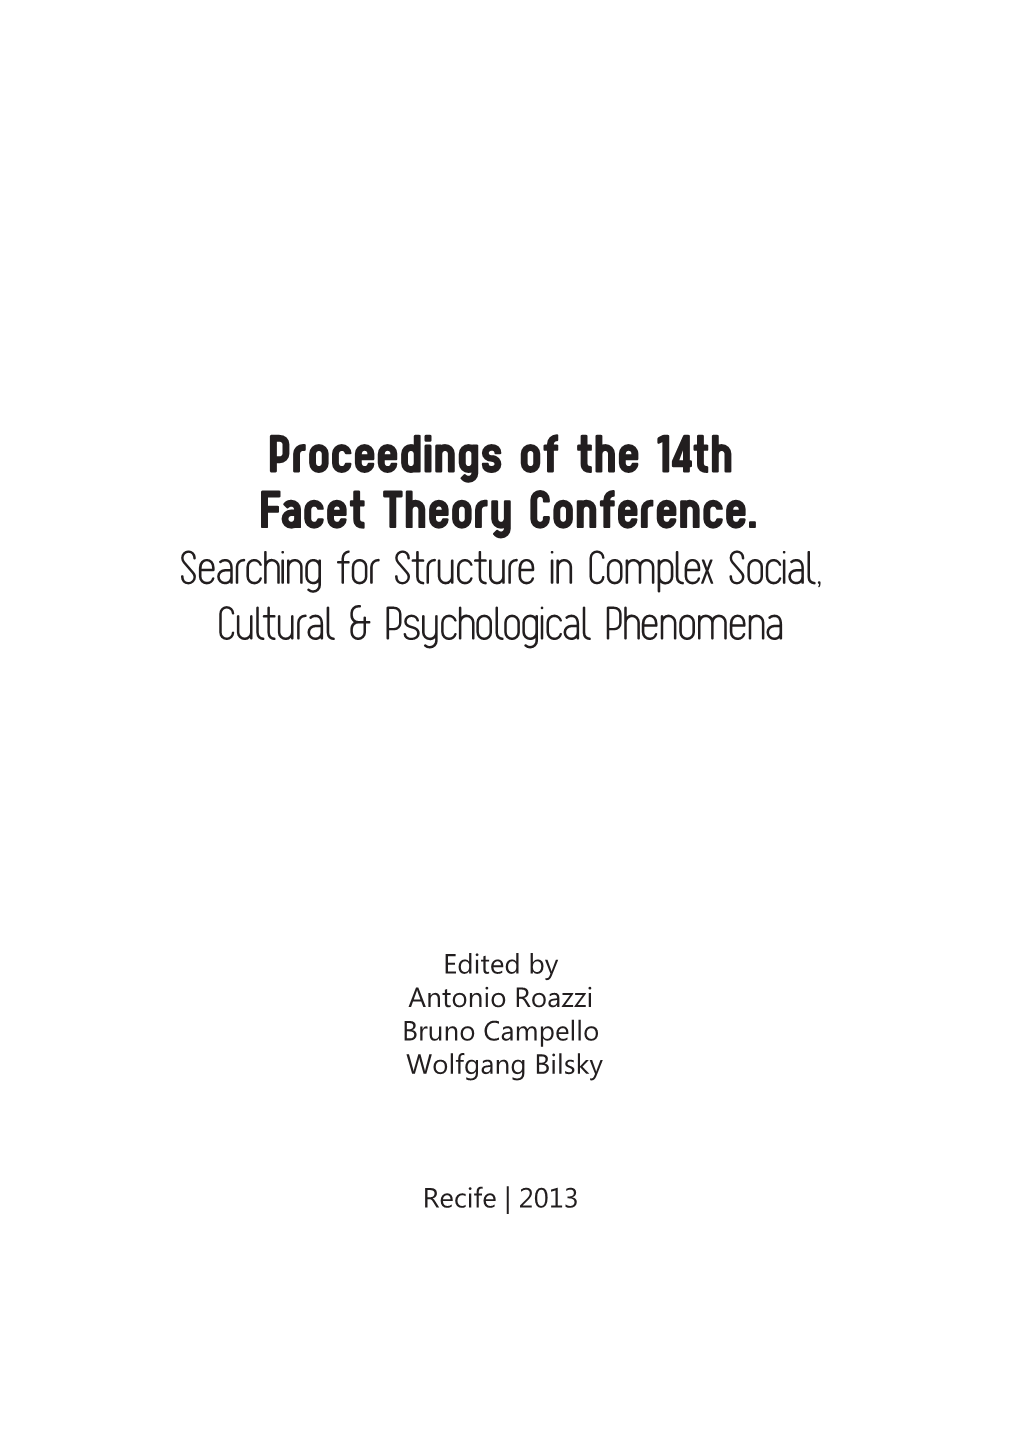 Proceedings of the 14Th Facet Theory Conference. Searching for Structure in Complex Social, Cultural & Psychological Phenomena